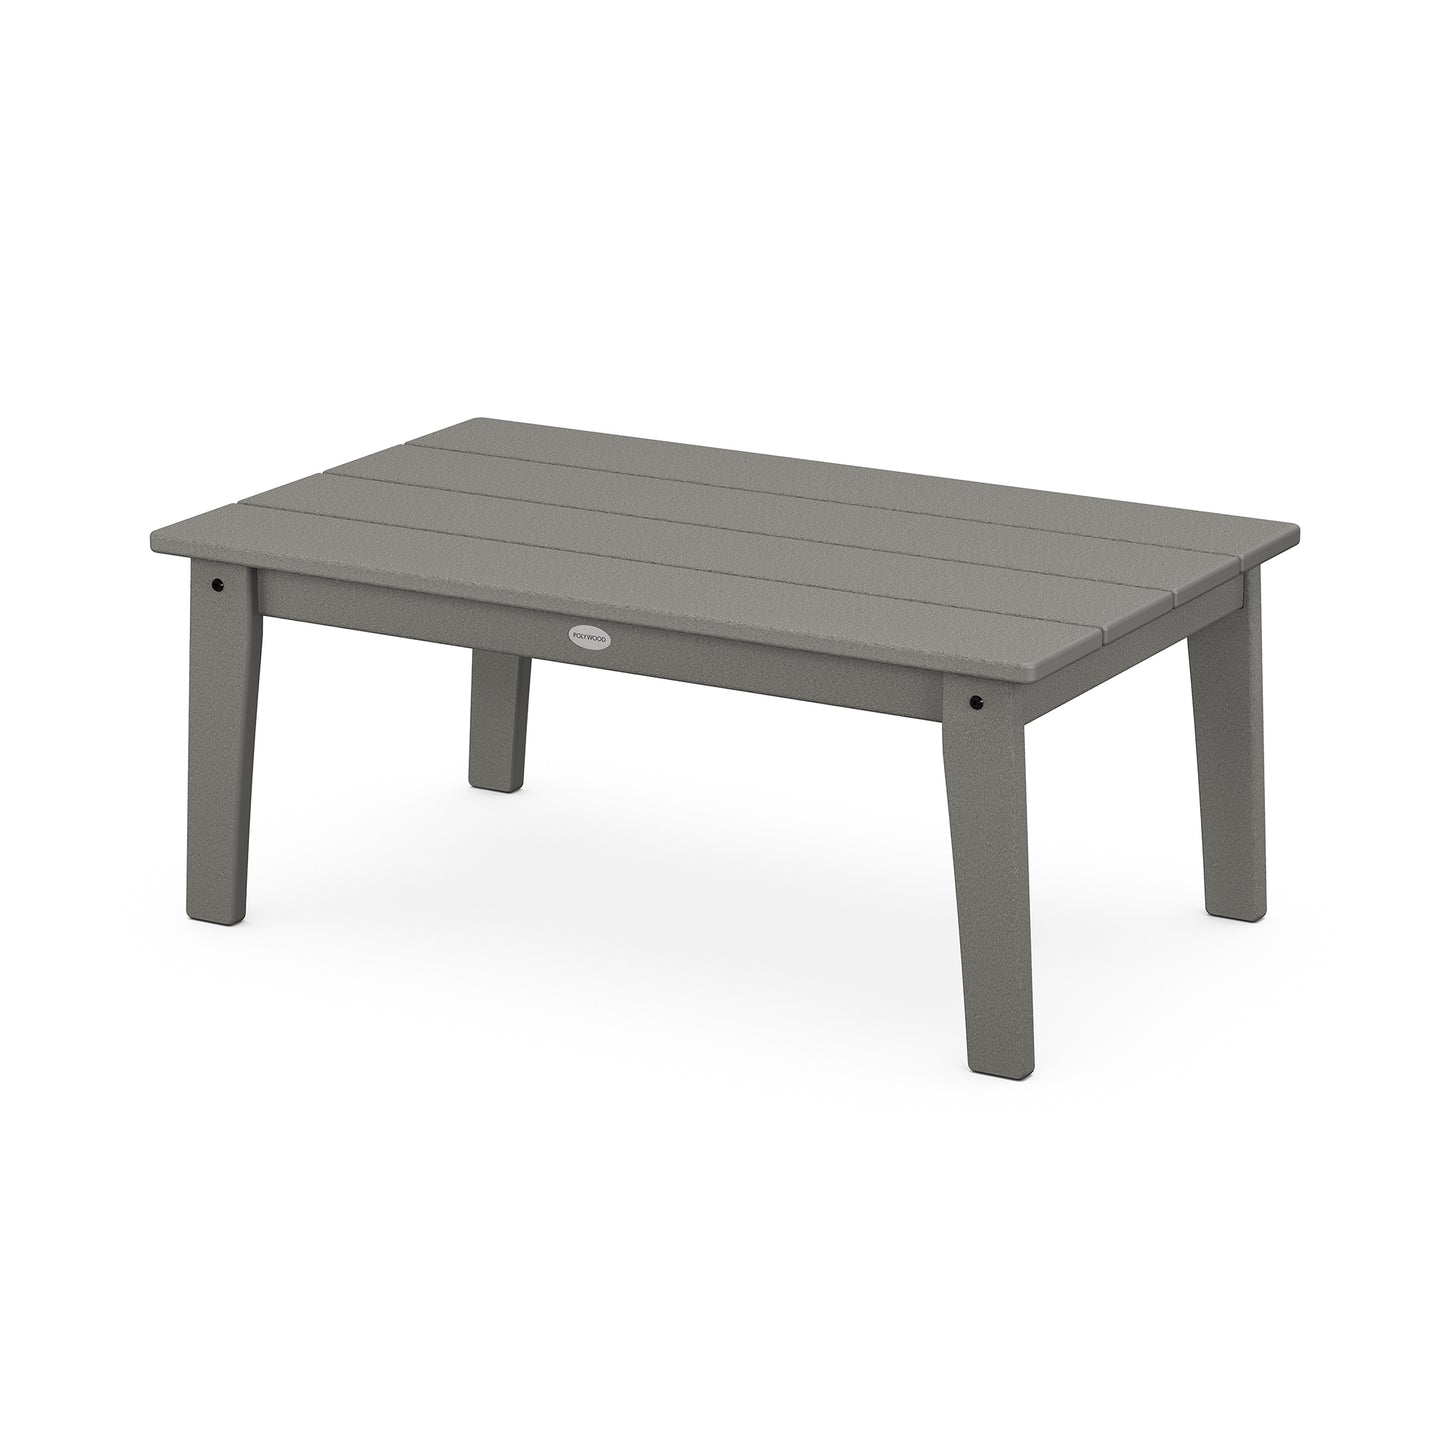 A straightforward image of a rectangular, gray POLYWOOD Lakeside 23" x 36" coffee table made of slatted plastic or composite materials, featuring a simple design with four sturdy legs.